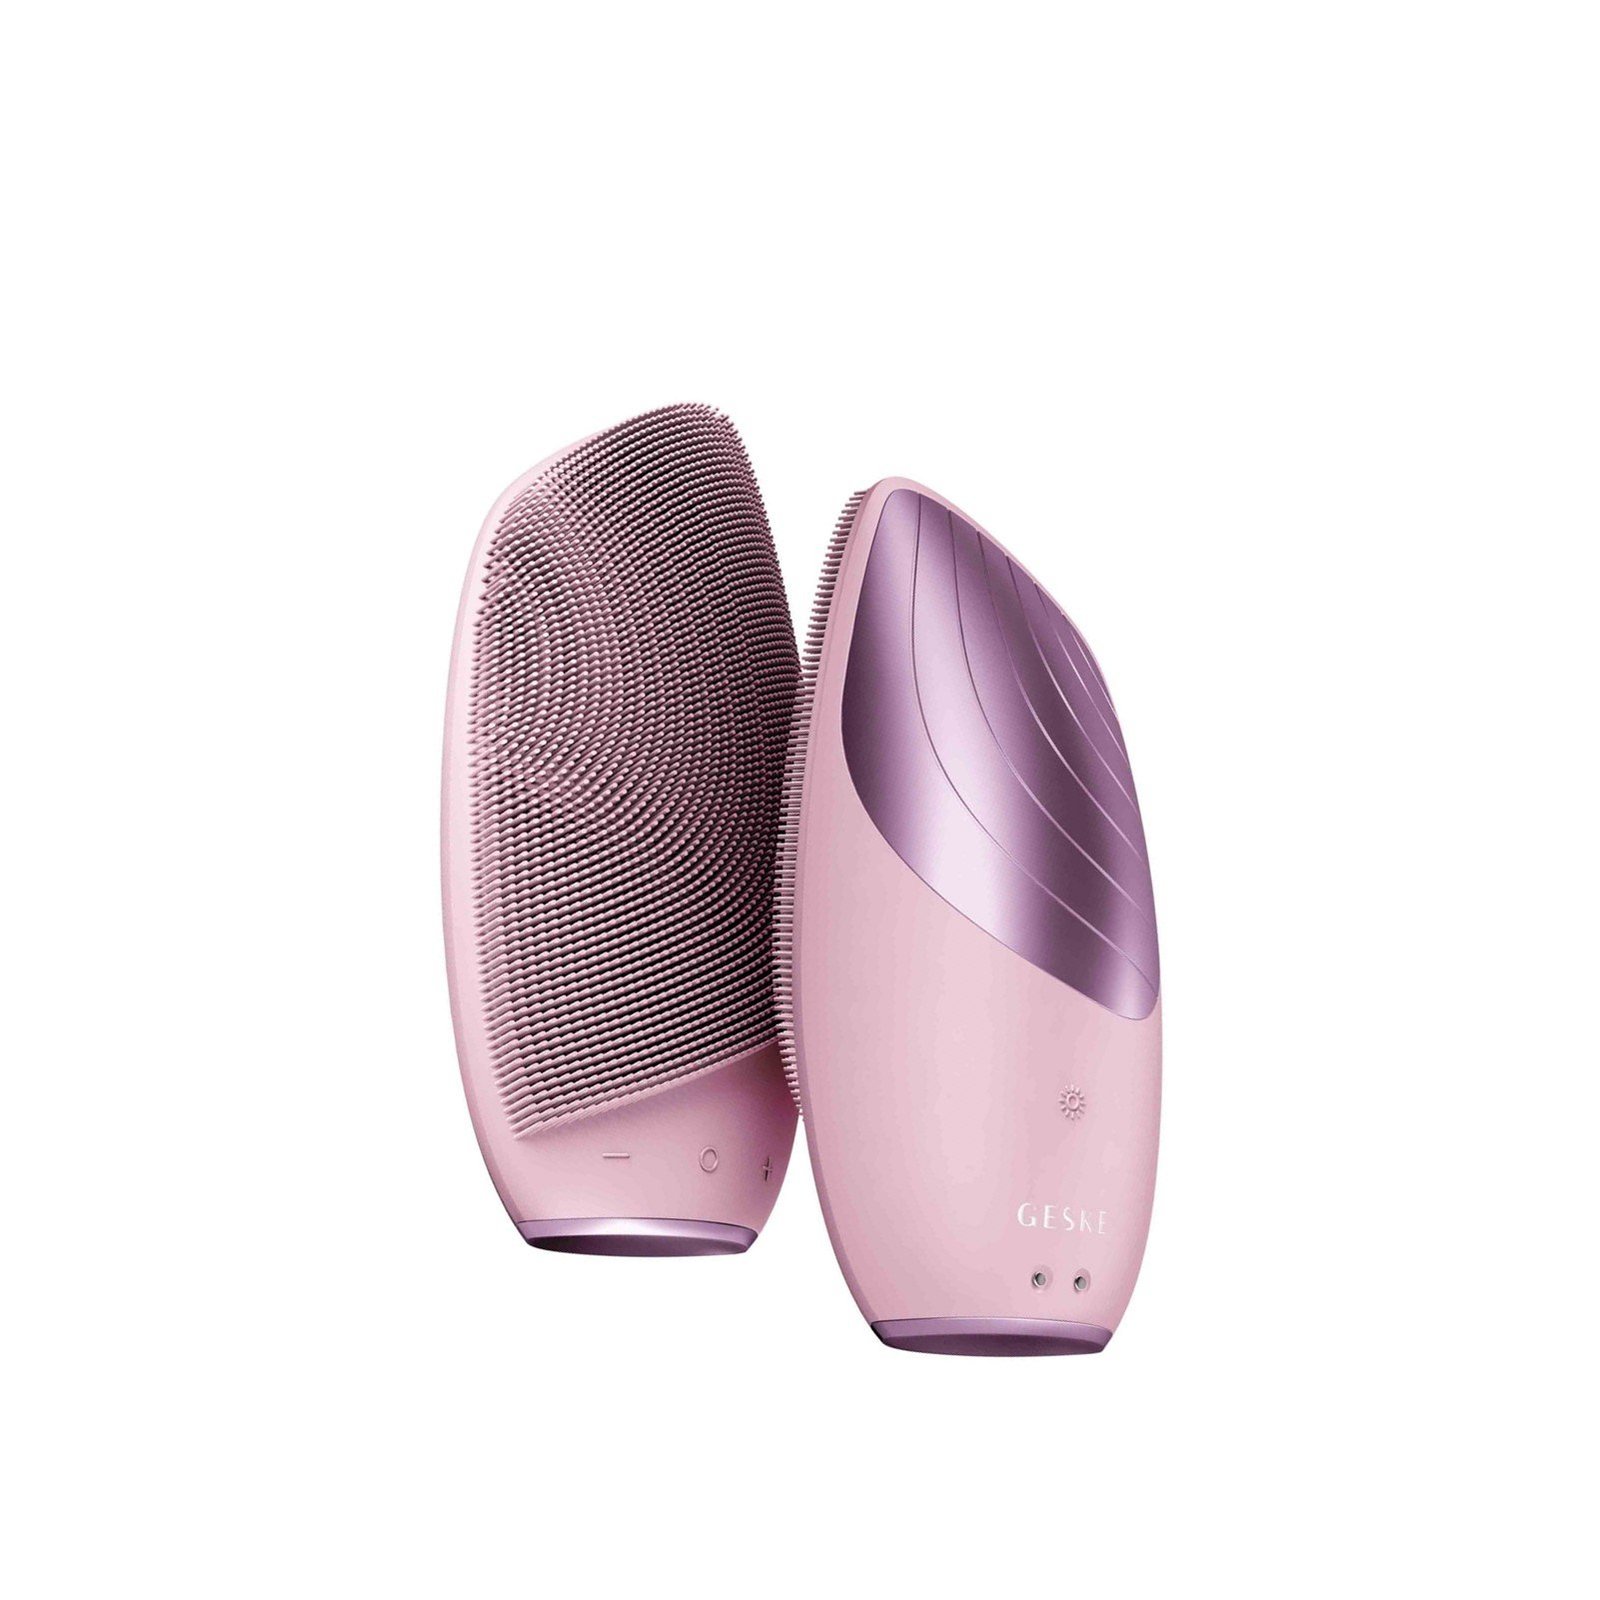 GESKE Sonic Thermo Facial Brush 6-In-1 Pink